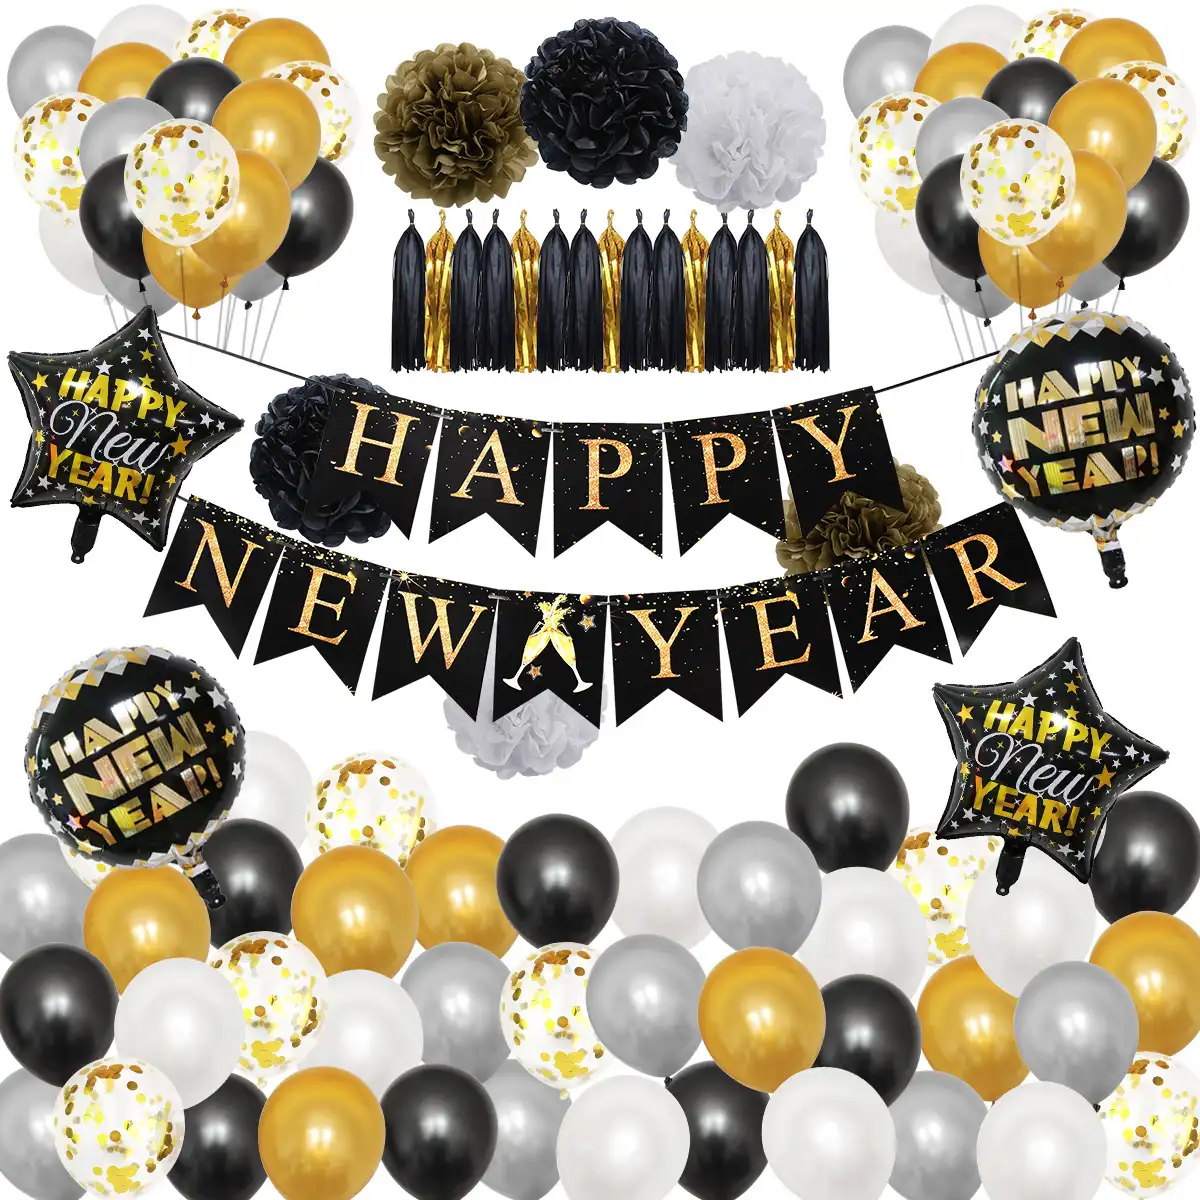 2022 new year banner foil balloon set happy new year banner party decoration 2022